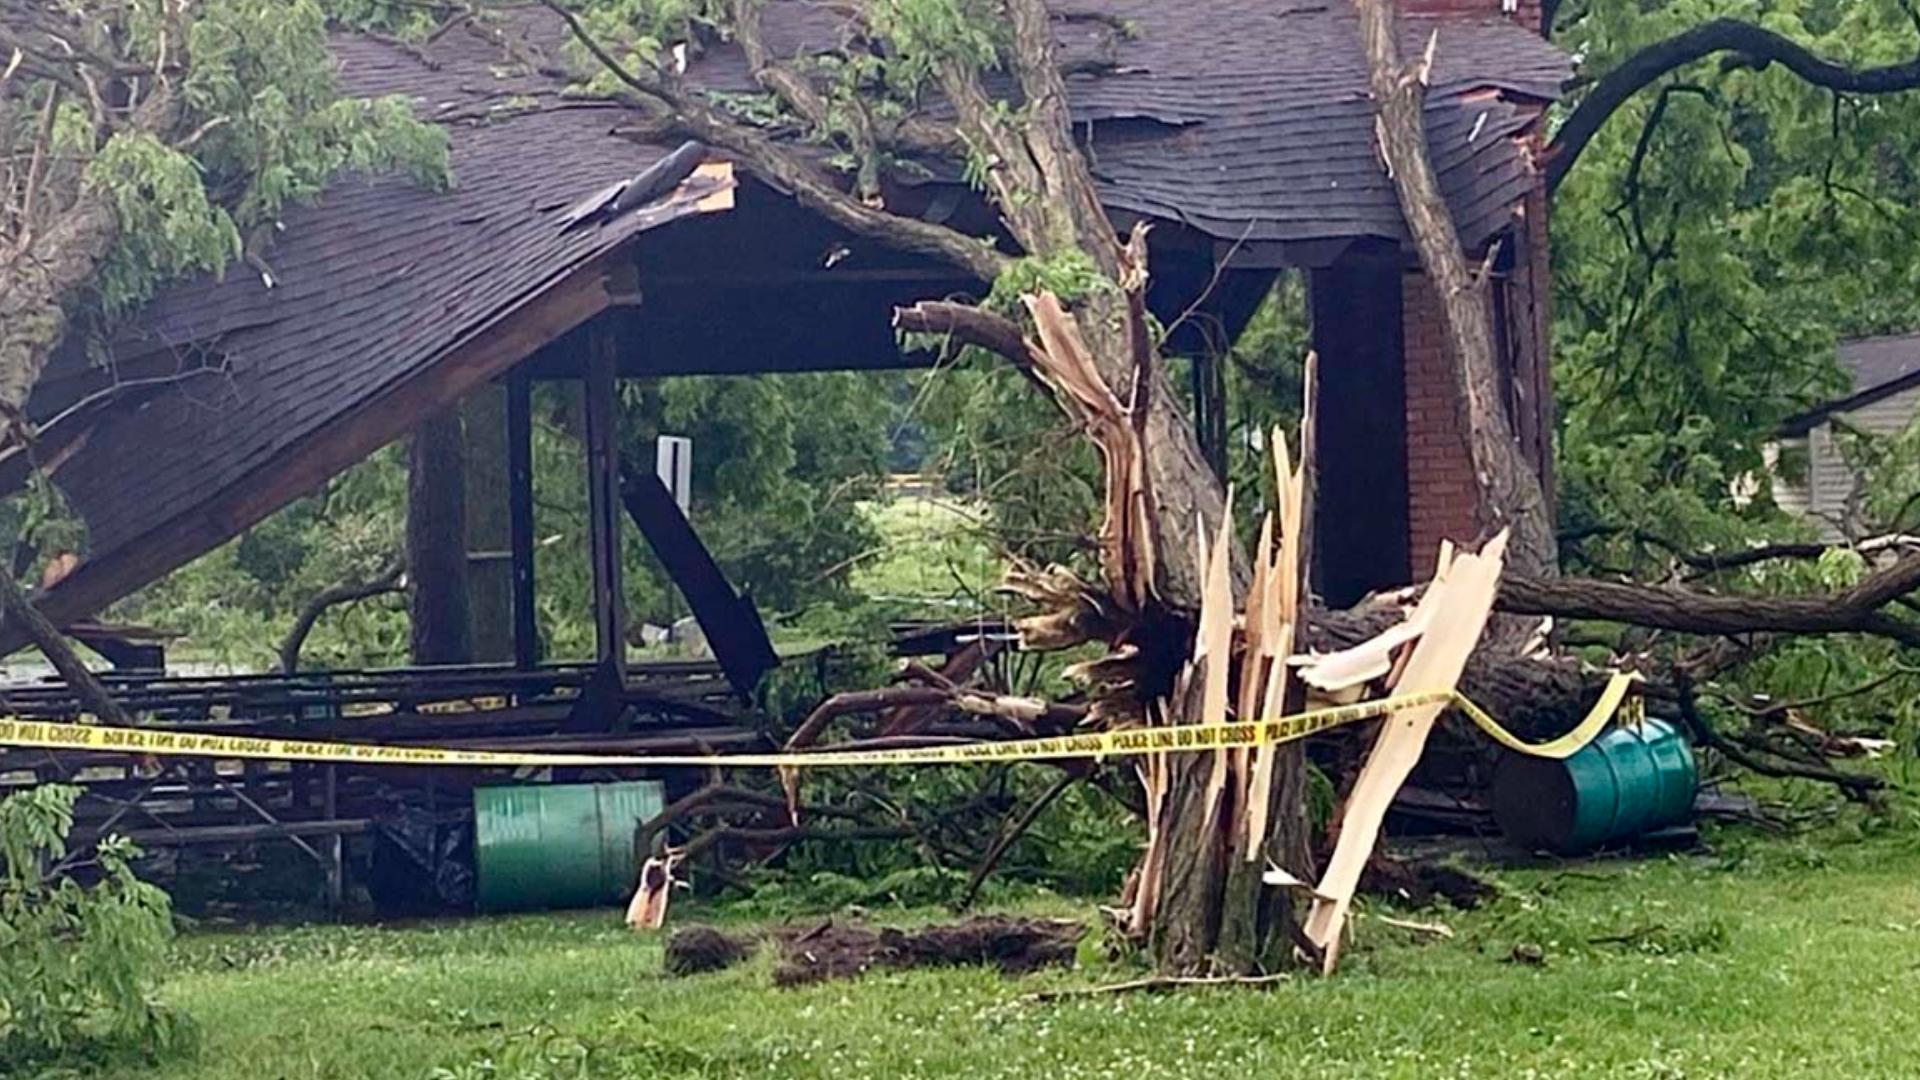 A toddler has been killed and his mother was injured when a tornado struck suburban Detroit without warning.